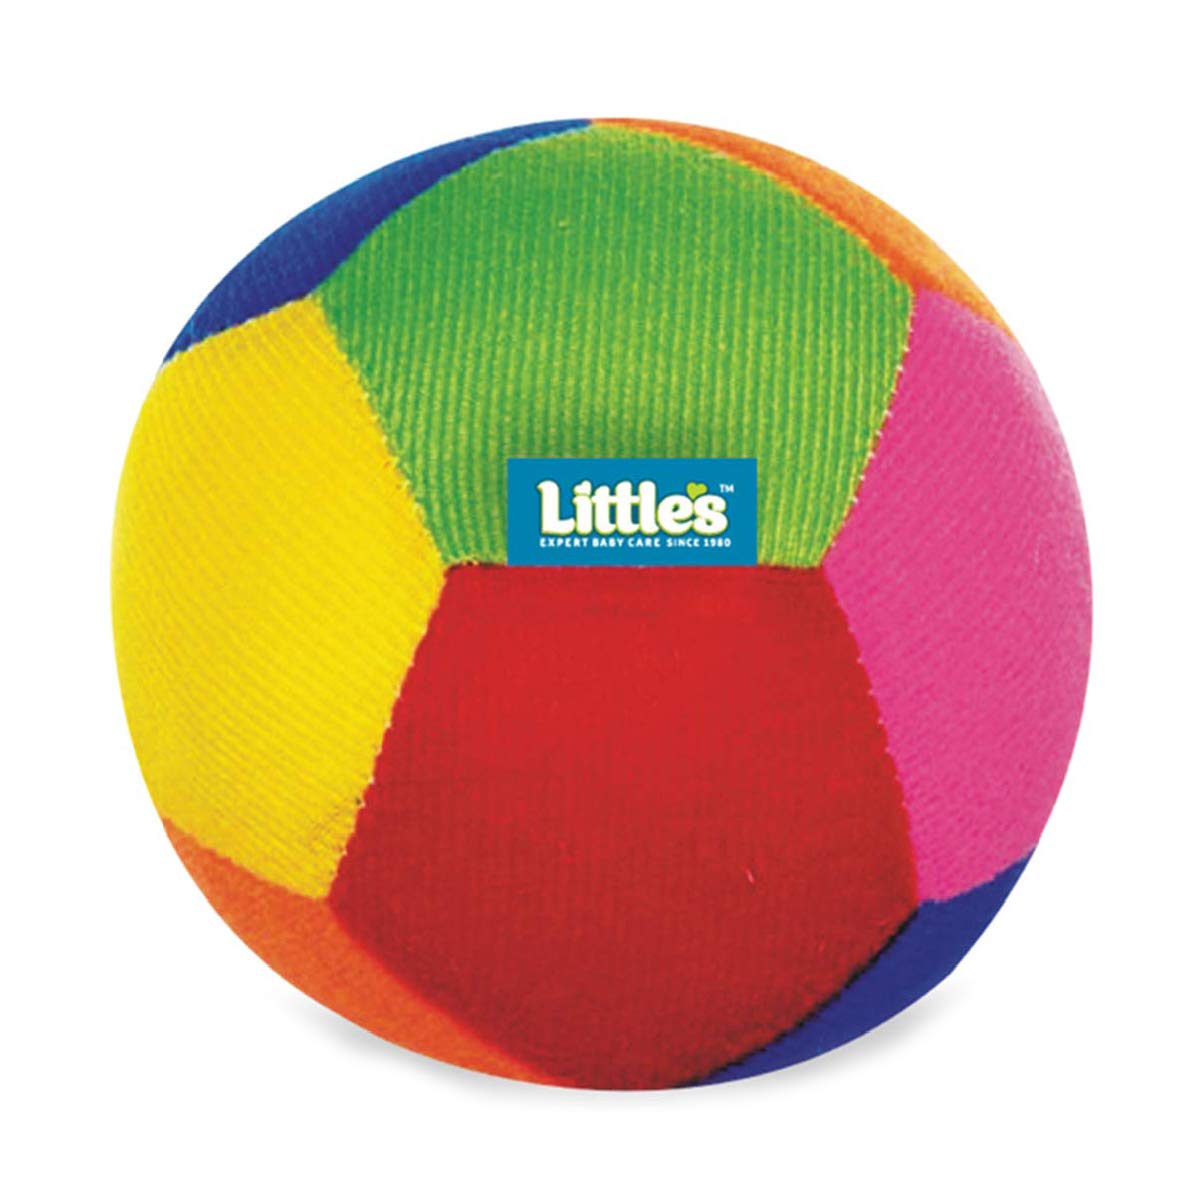 Little's - Baby Soft Ball | Toys For Babies